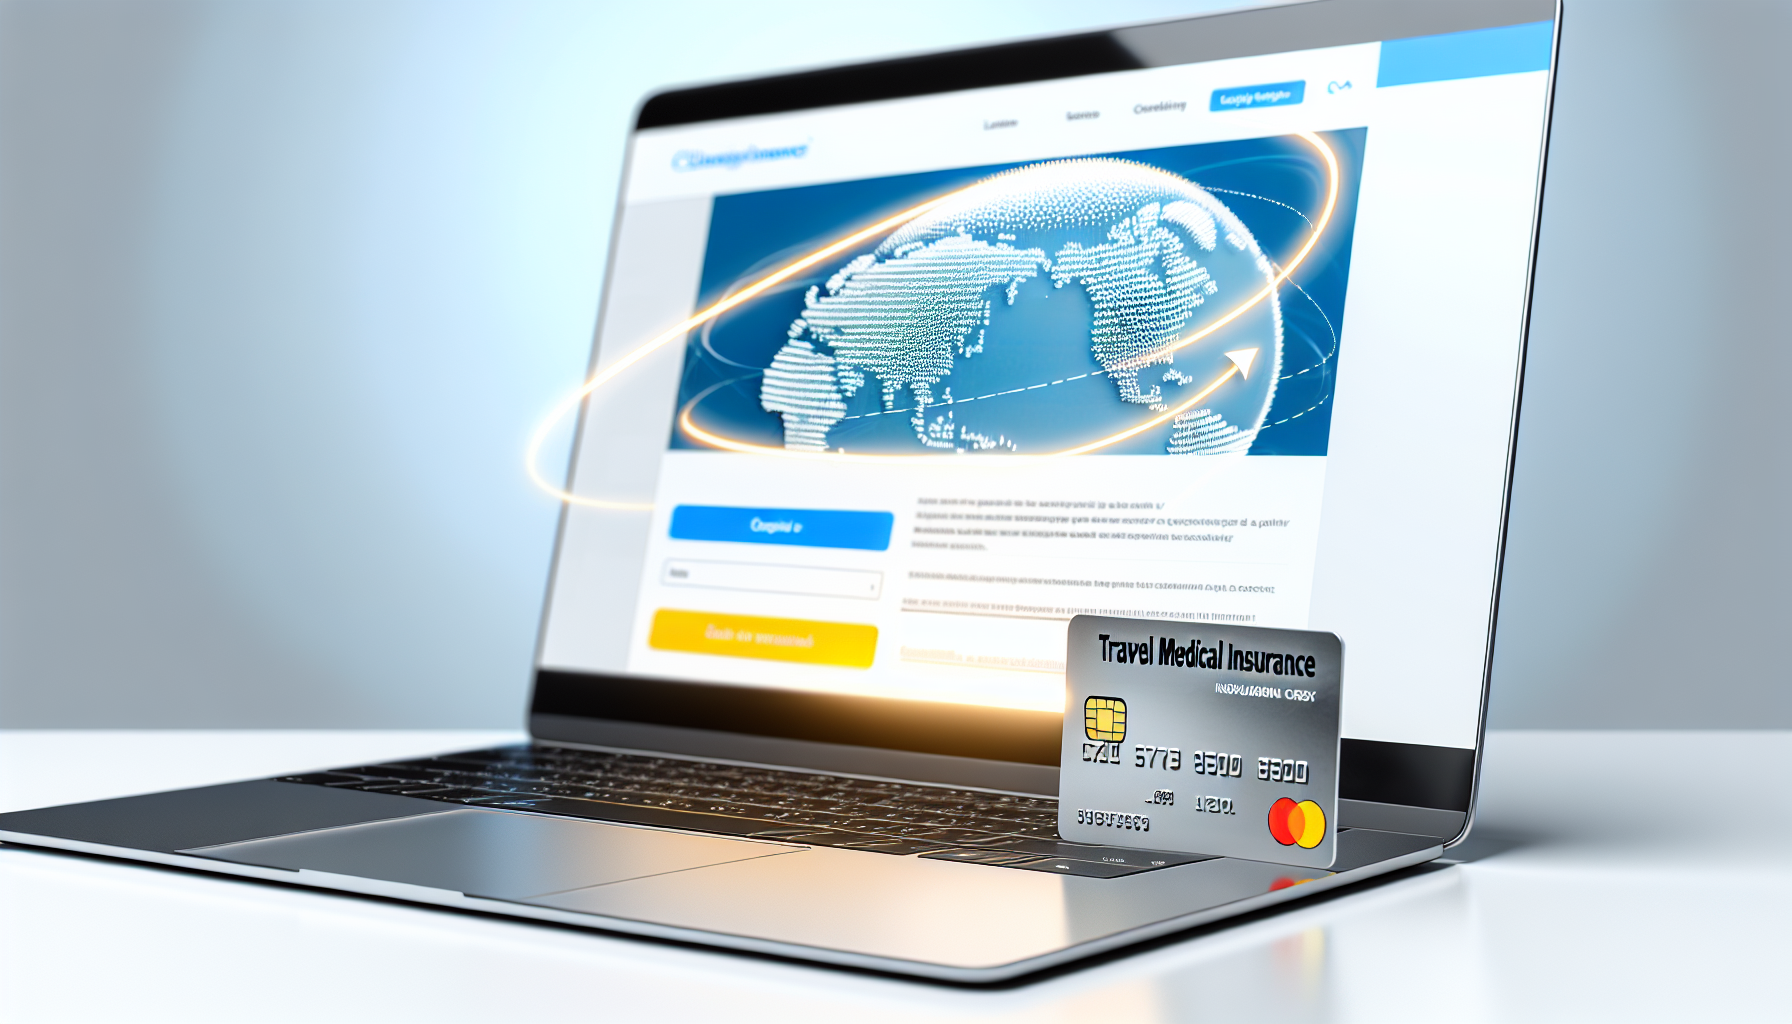 Online Purchase Of Travel Medical Insurance With Laptop And Credit Card